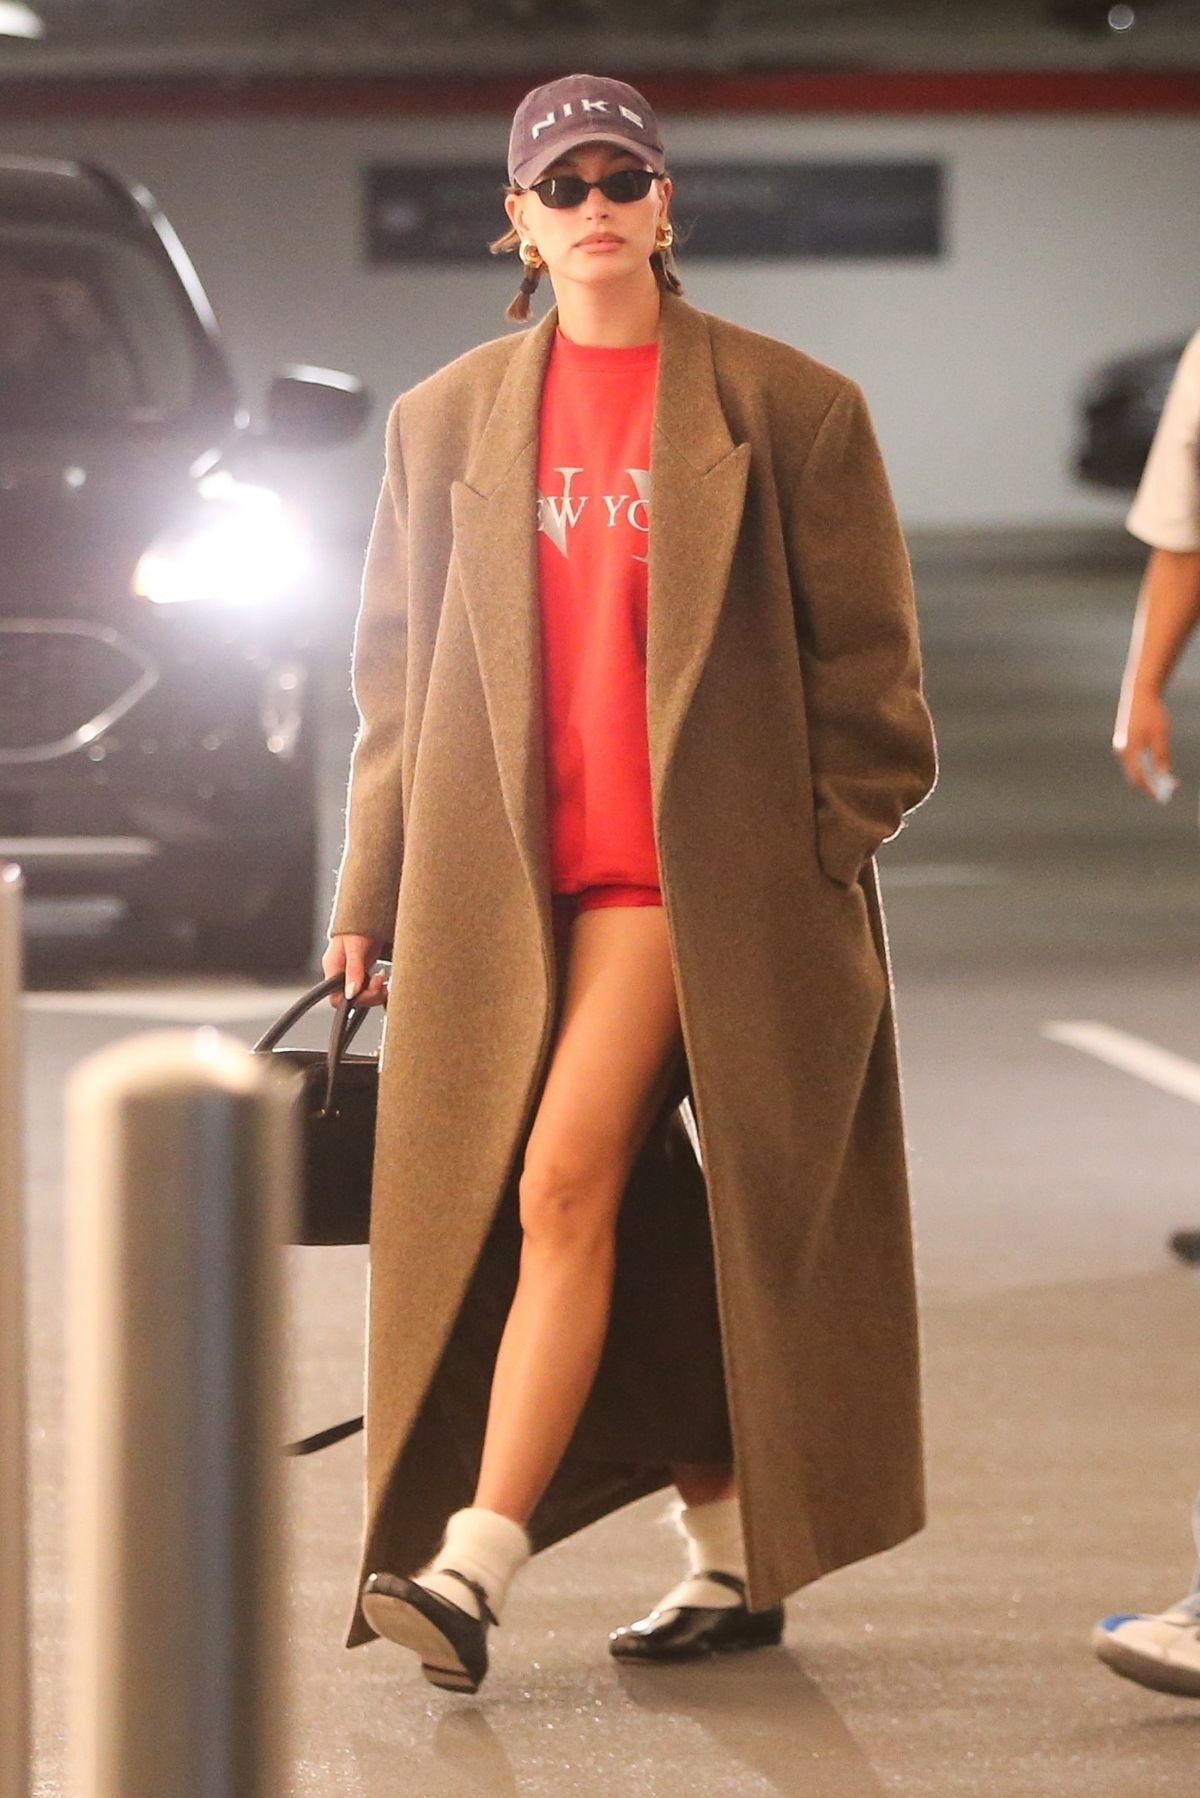 Hailey Bieber in Red Sweatshirt Arrives at LA Doctor’s Appointment 4